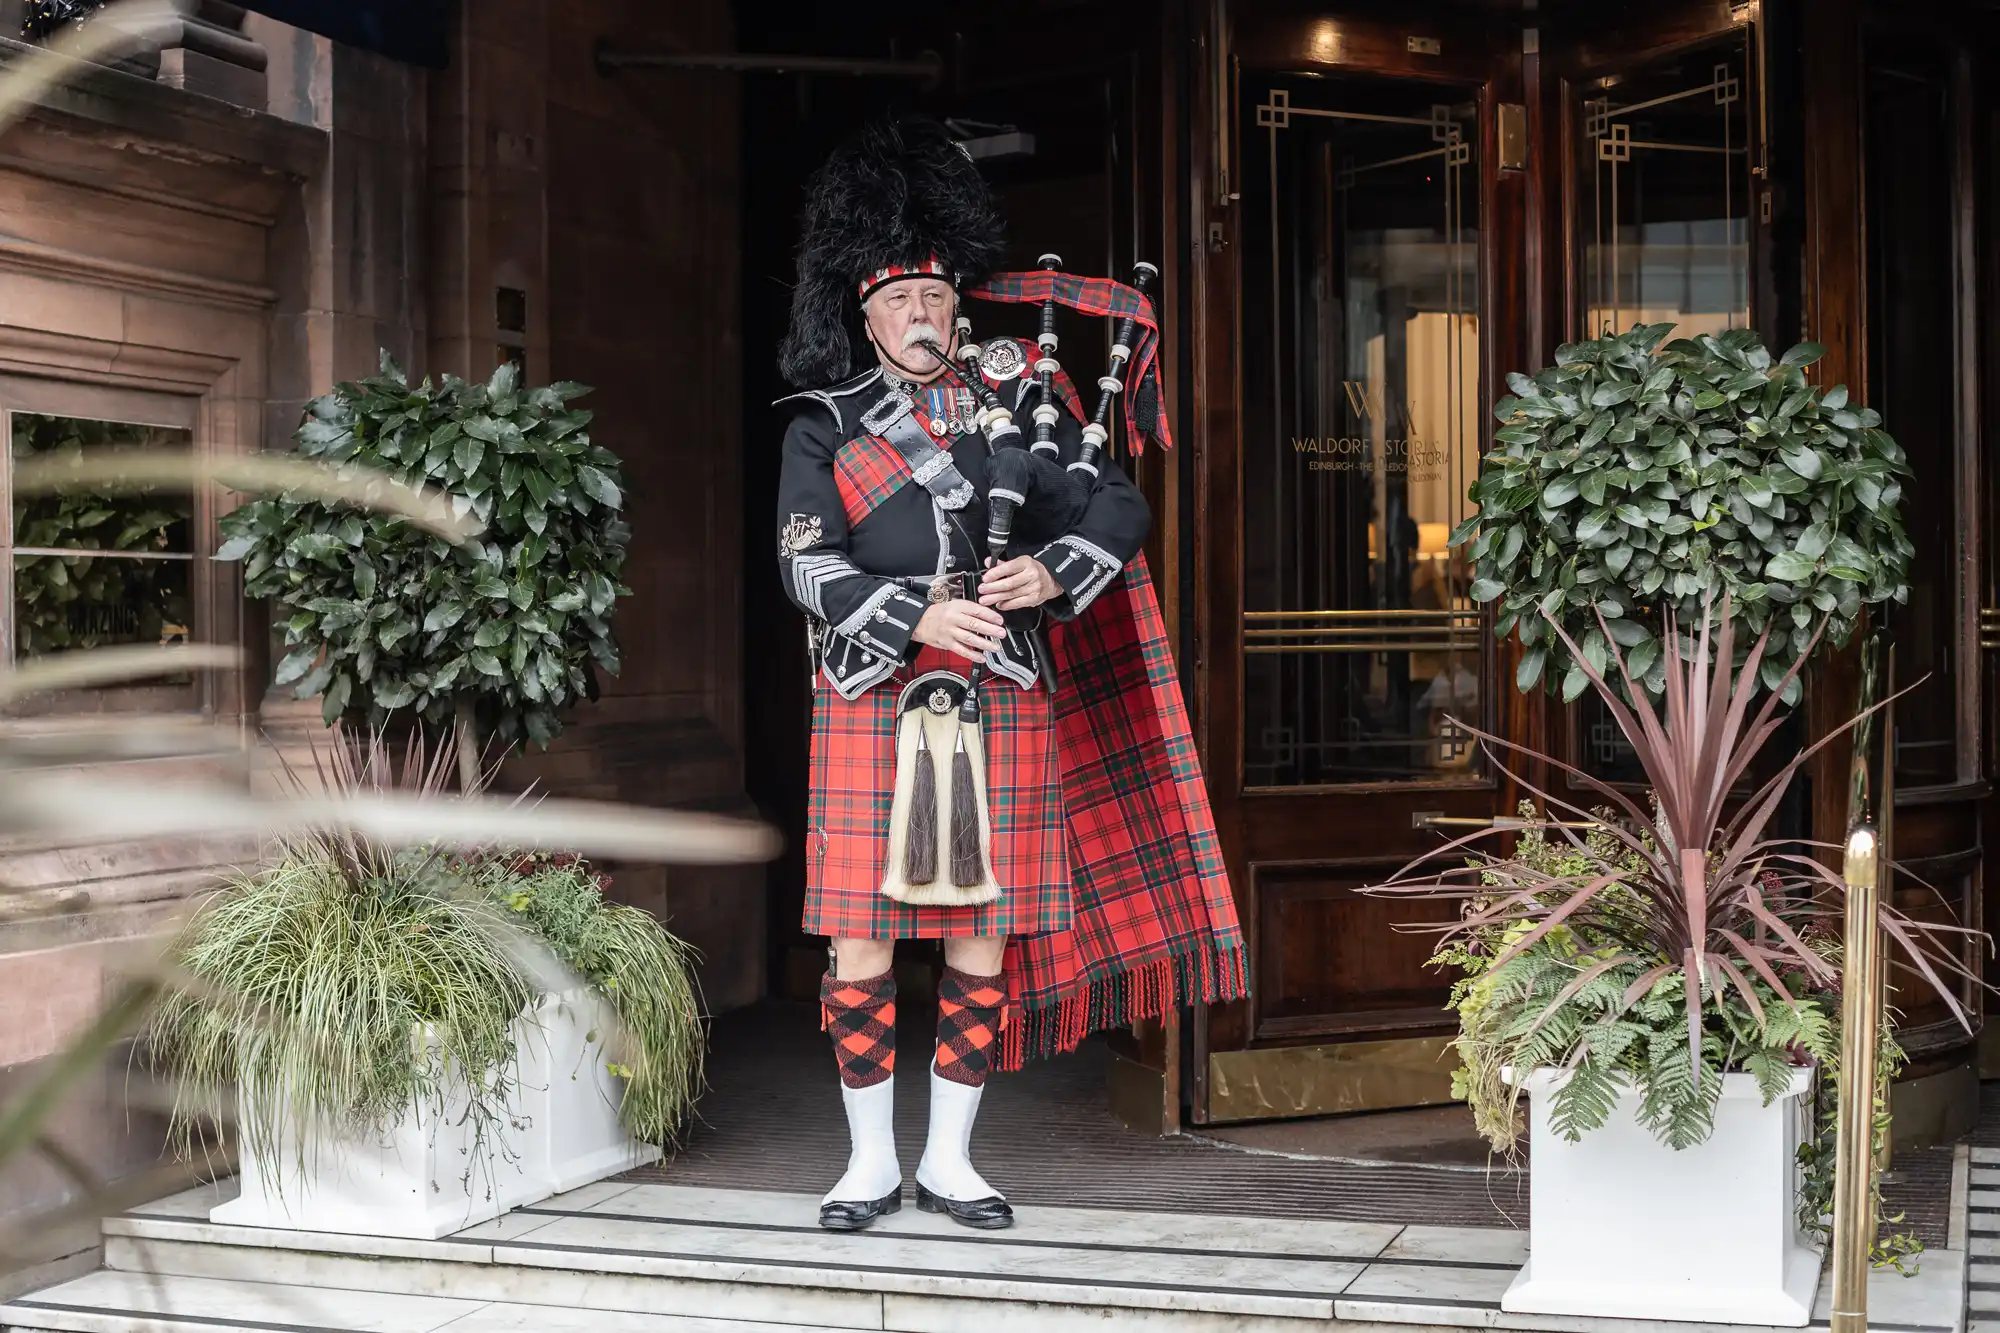 A man in traditional Scottish attire plays the bagpipes outside a building entrance, flanked by two potted plants.